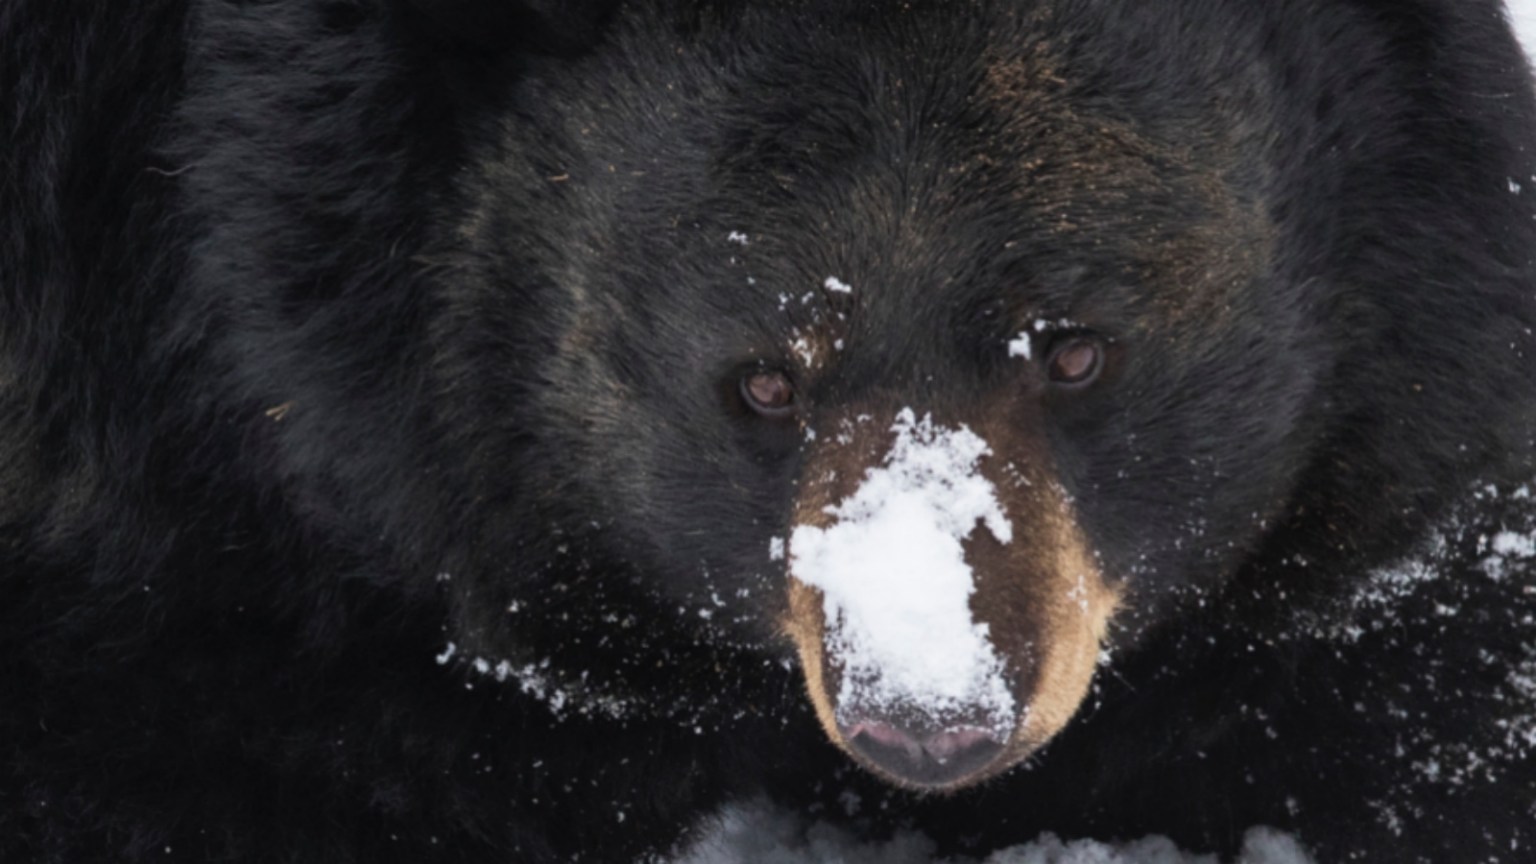 Cocaine Bears! Florida Rep. Claims Wild Bruins On Crack Are Breaking Into Homes And Wants To Legalize Shooting Them (brobible.com)